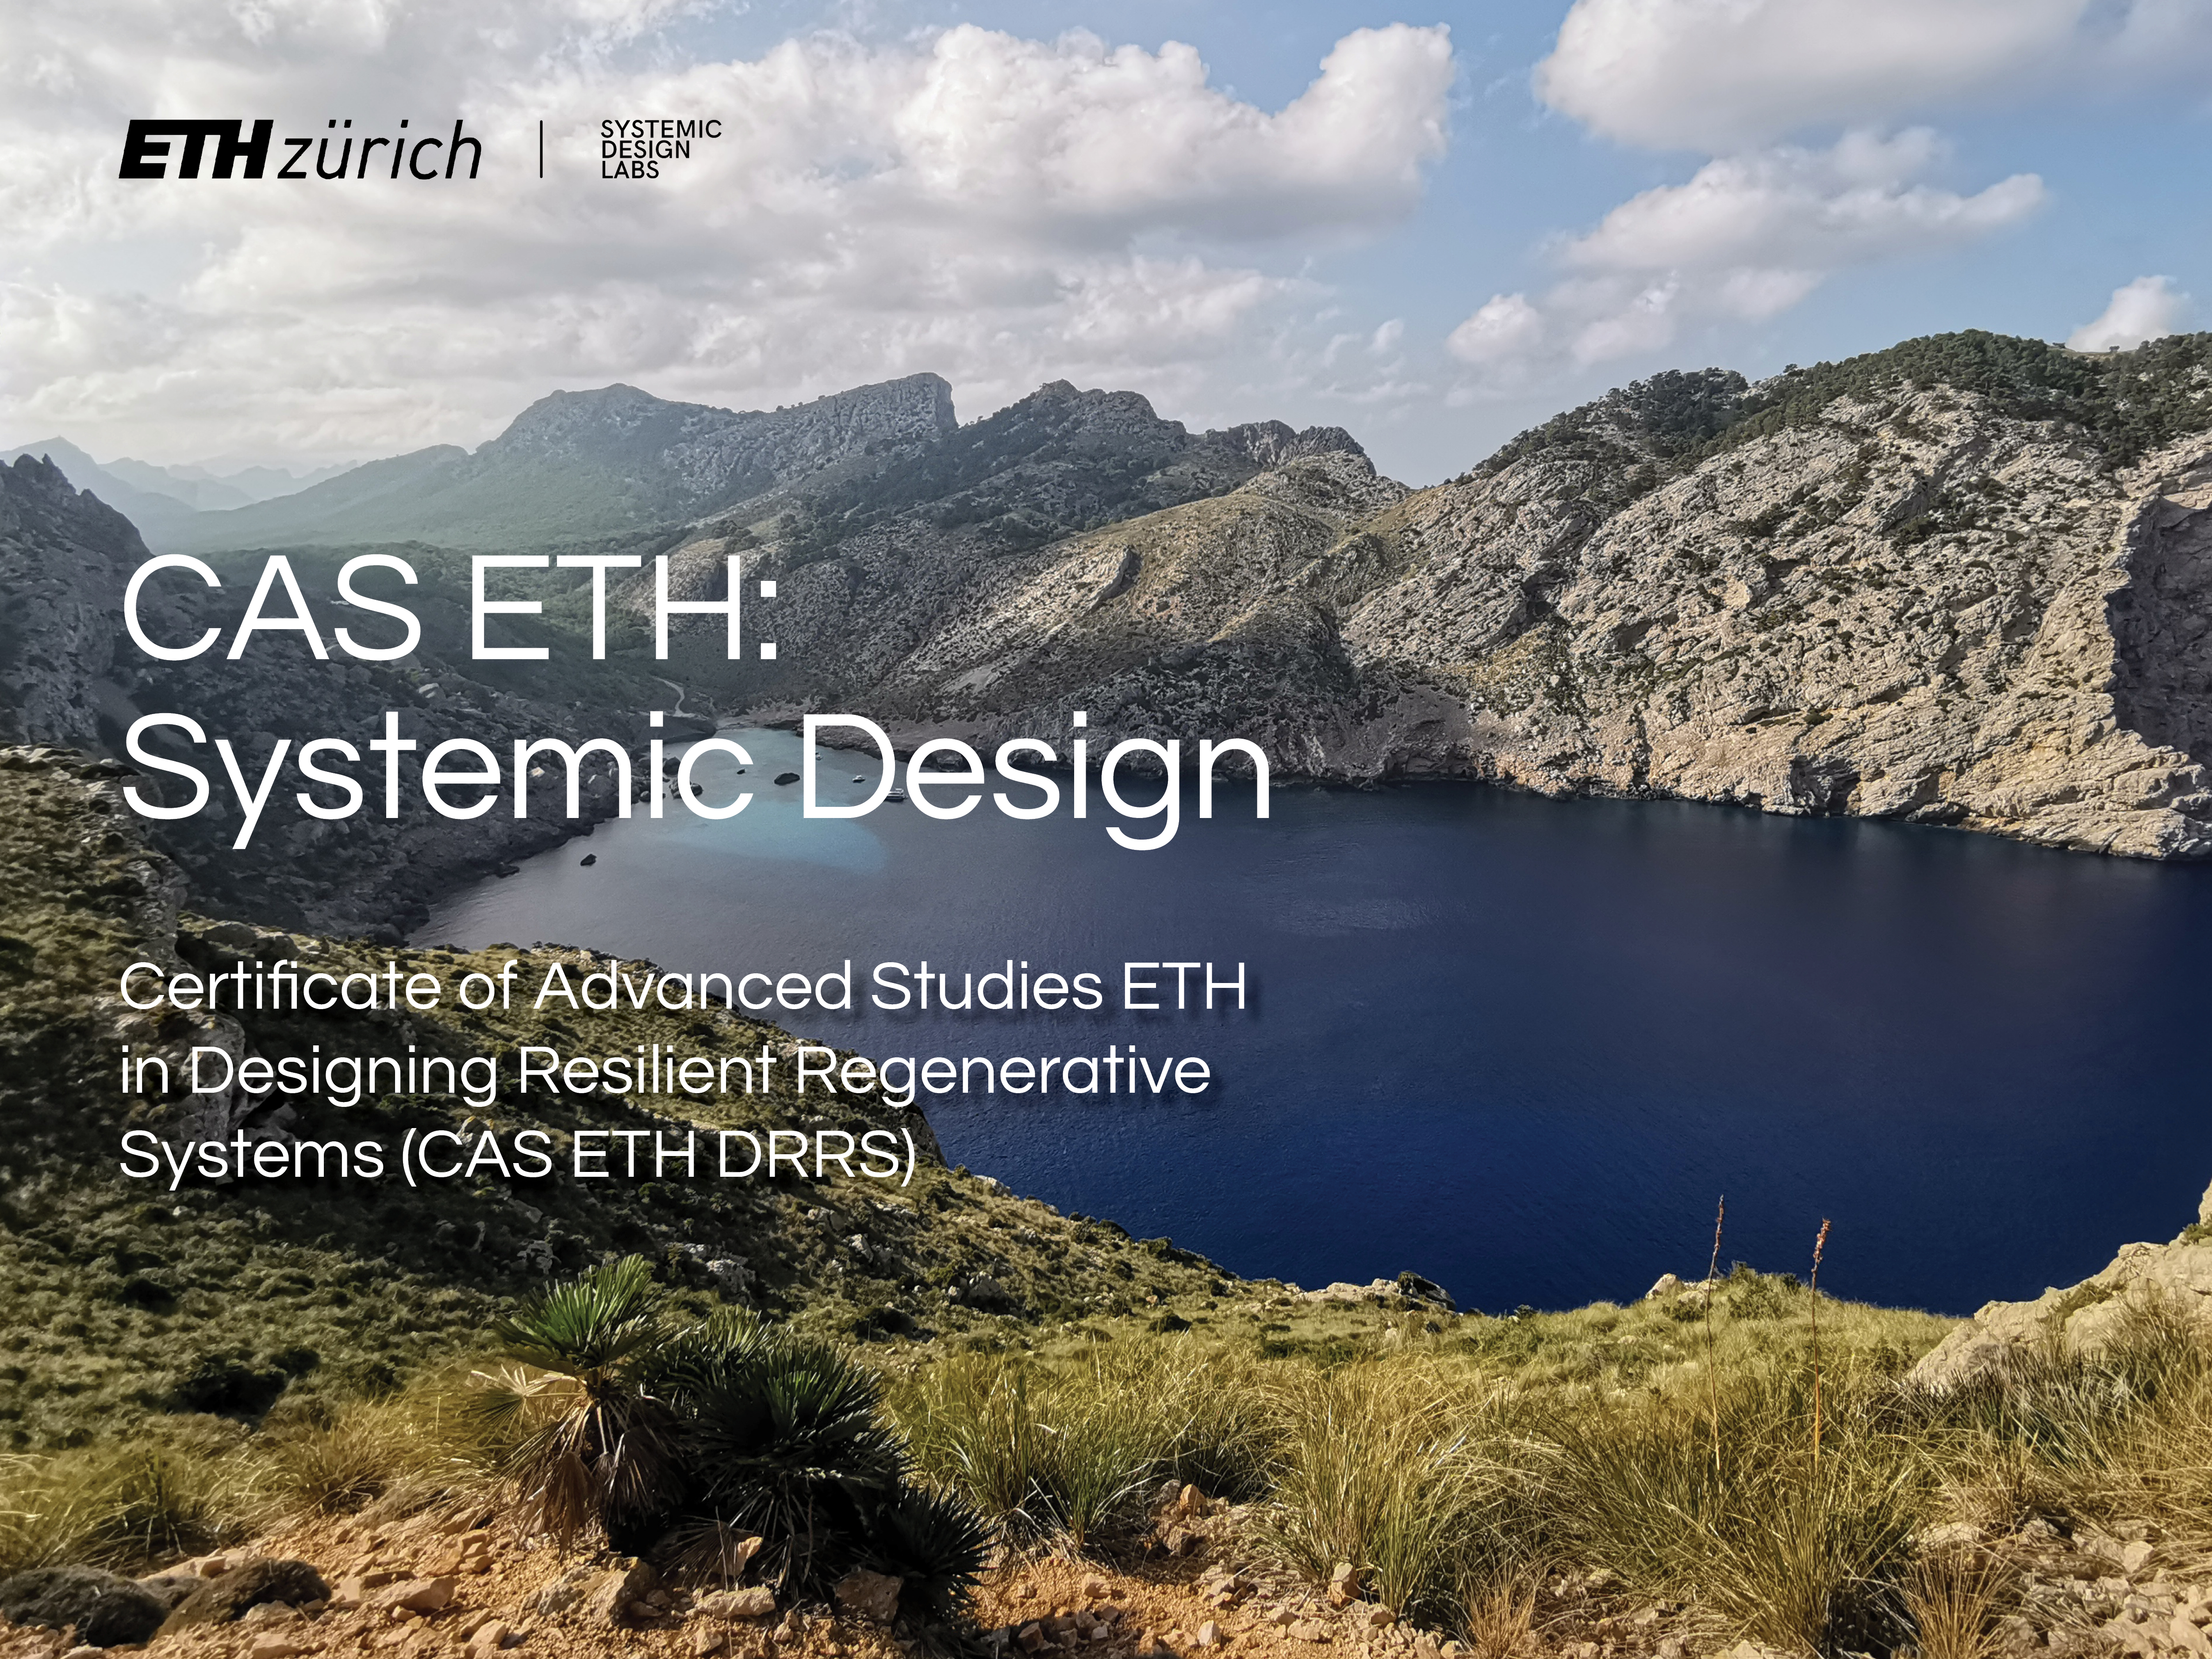 Third Certificate of Advanced Studies in Regenerative Systems: Systemic Design